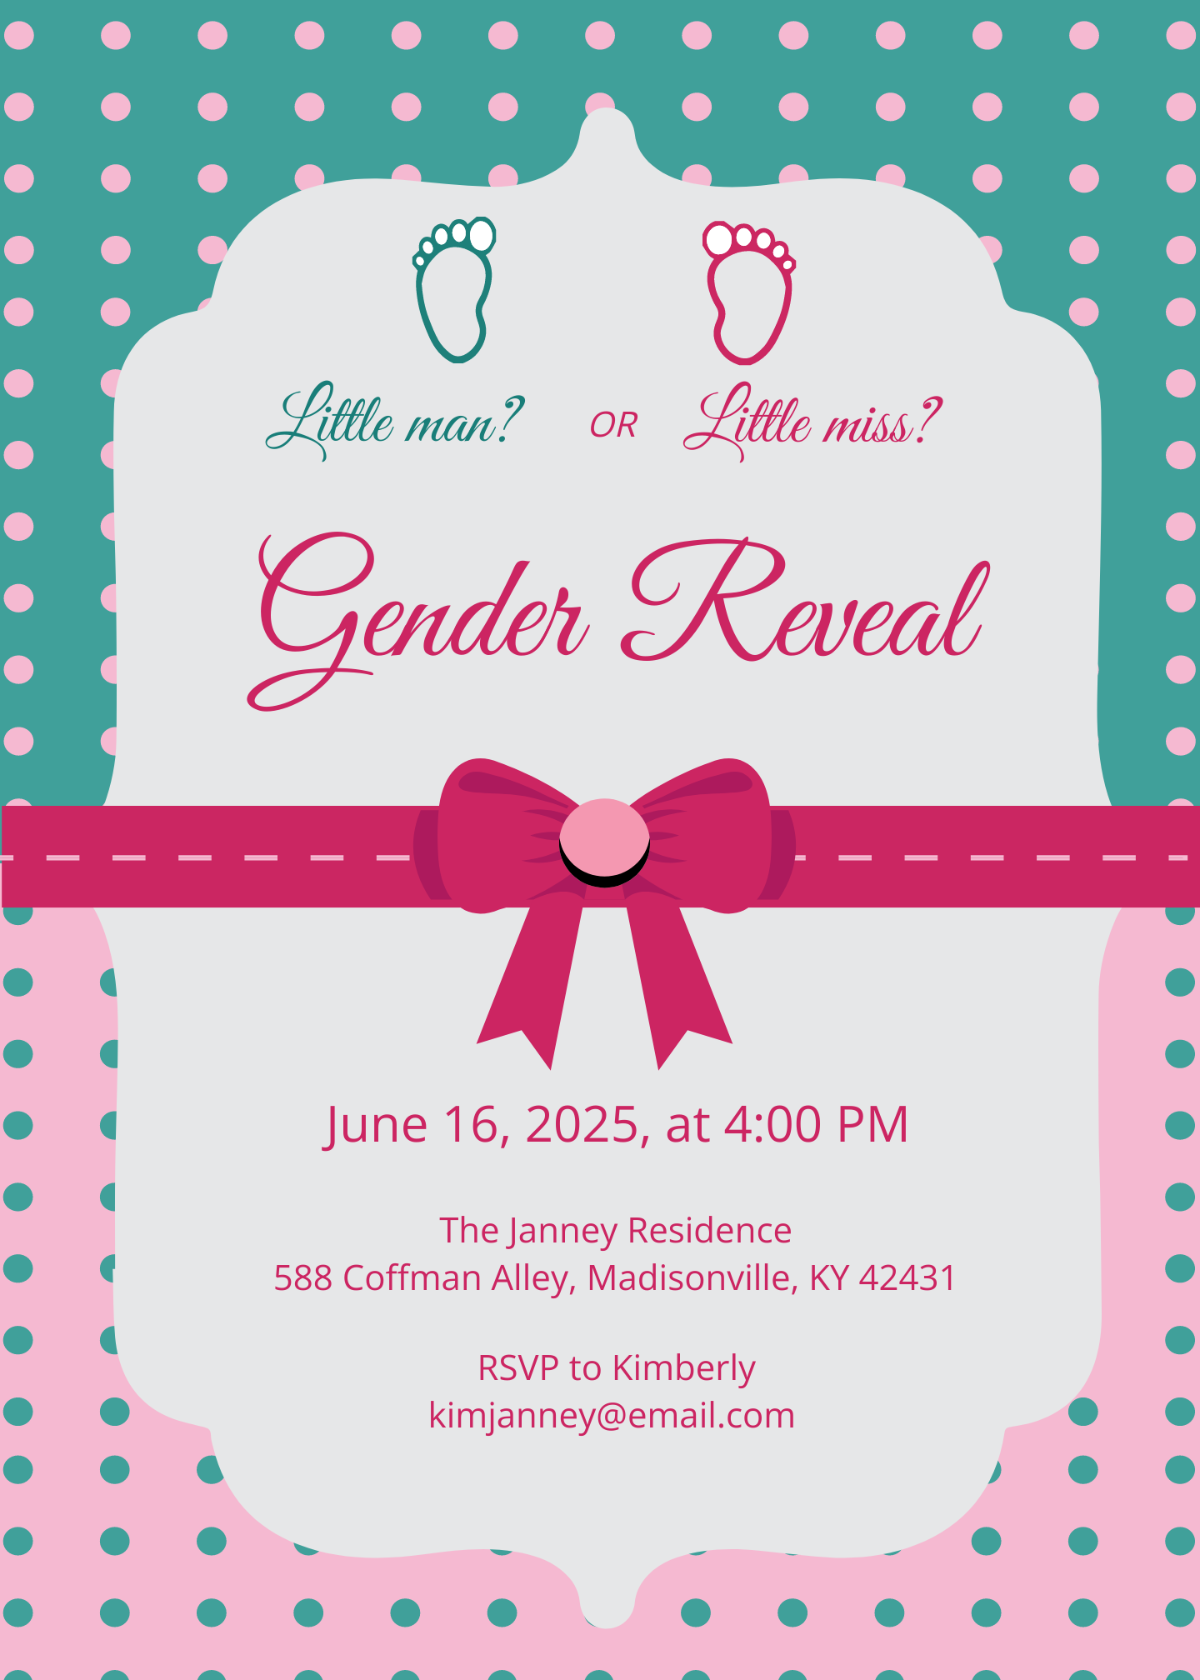 one fish two fish pink fish blue fish gender reveal - Google Search   Gender reveal invitations, Gender reveal party invitations, Gender reveal